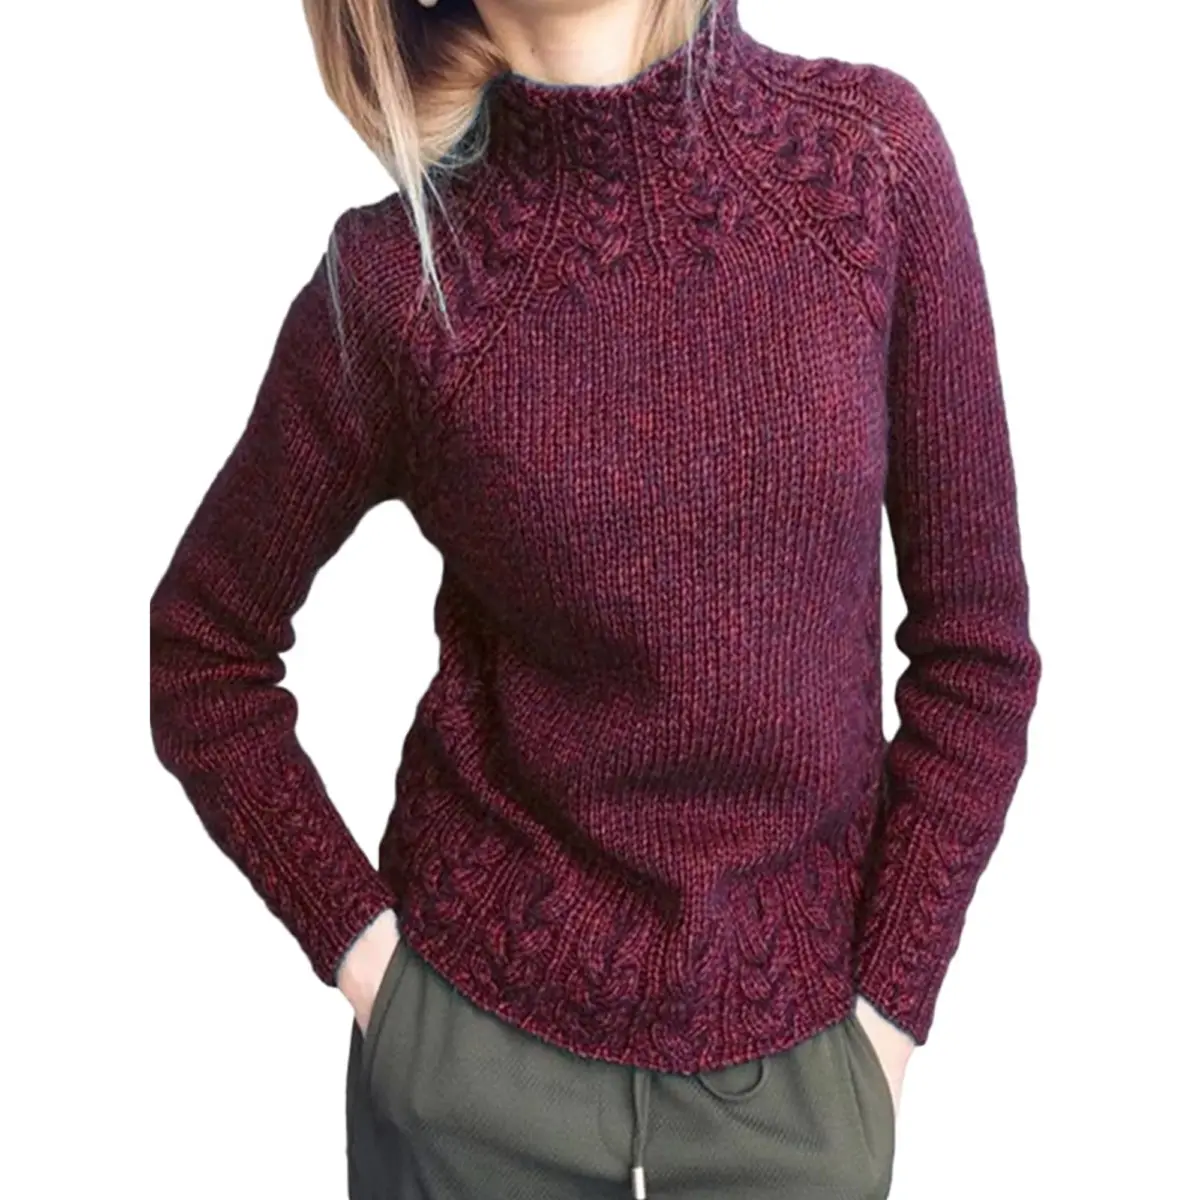 Winter Warm Jumper Tops for Women Casual Knitted Sweaters Dark Red